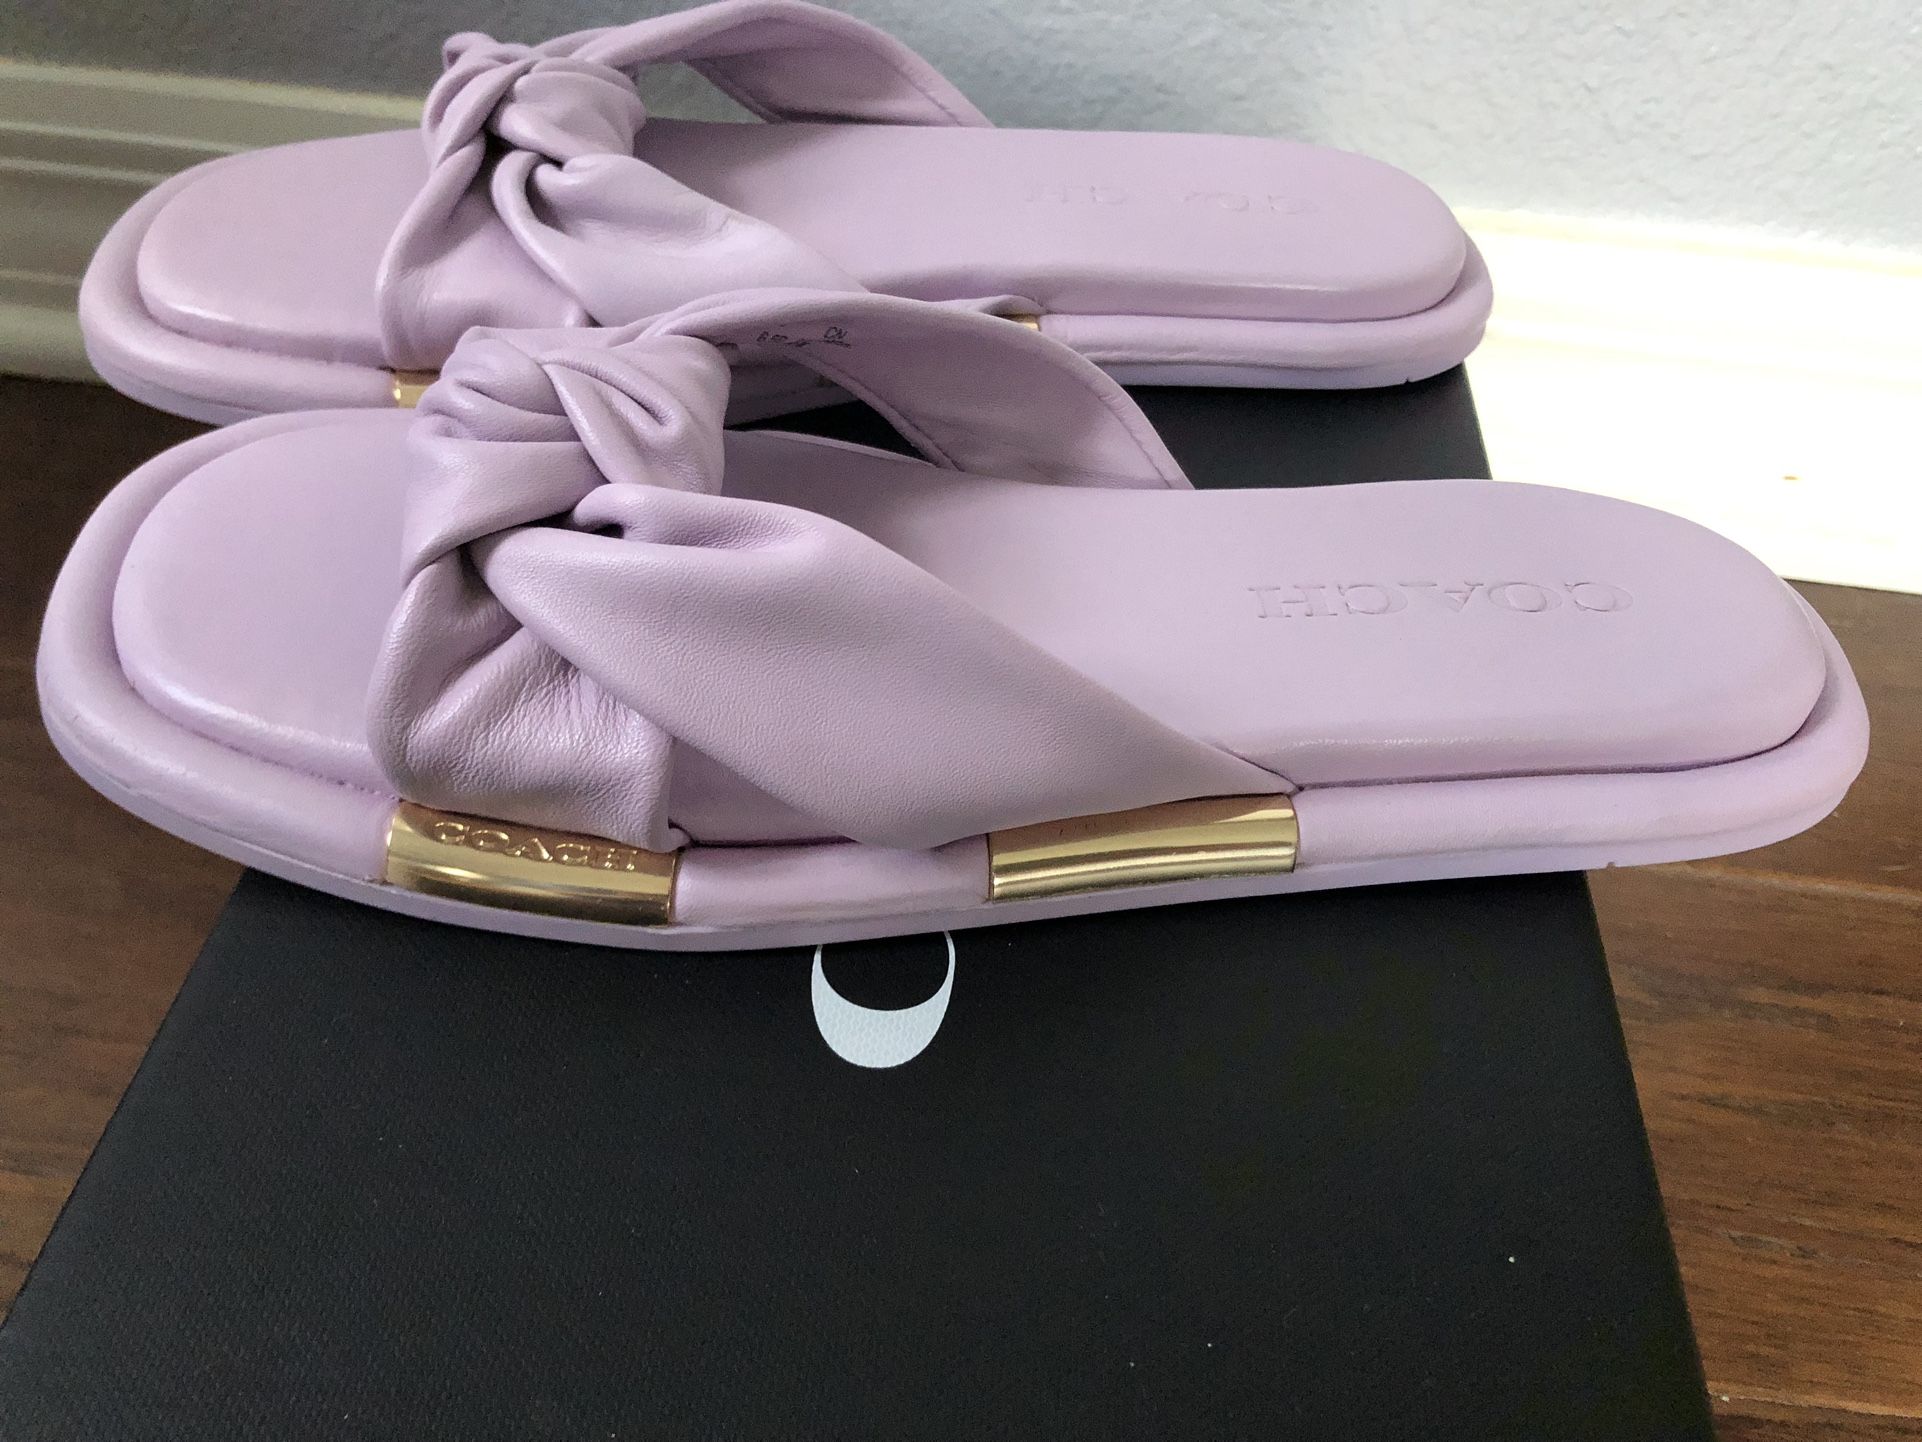 New COACH Knotted Leather Flat Sandals With Box